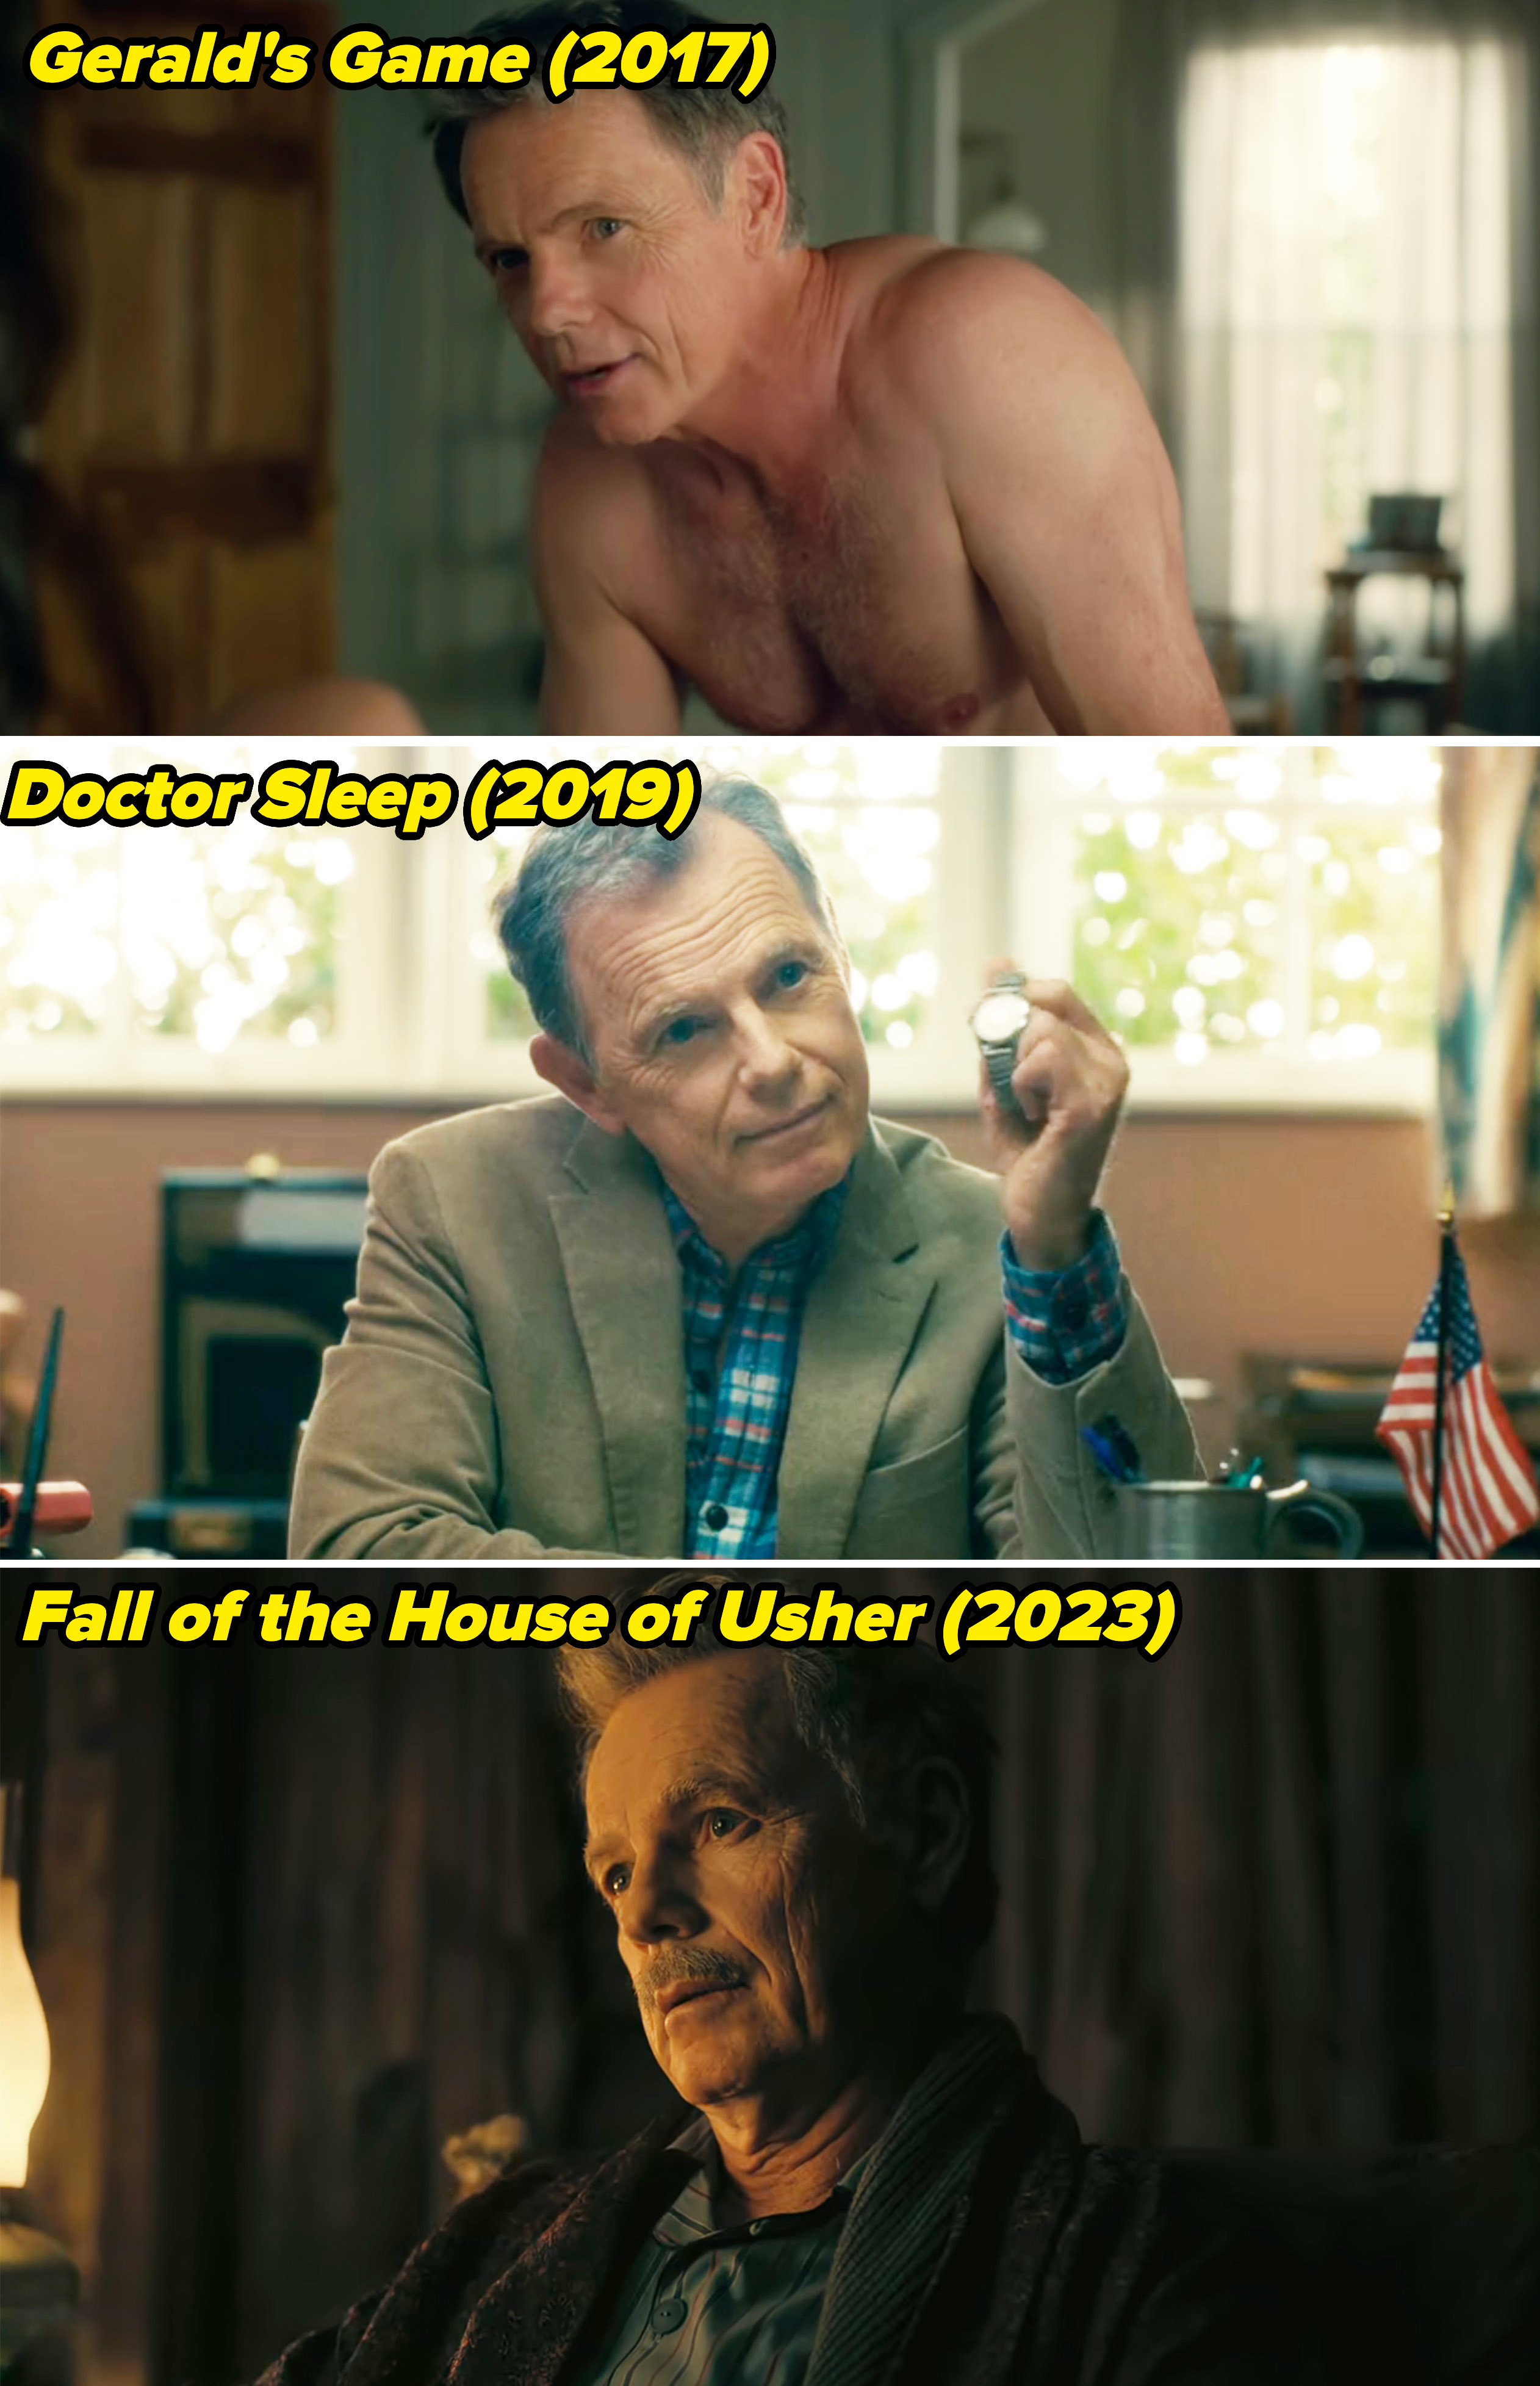 Bruce Greenwood in various projects